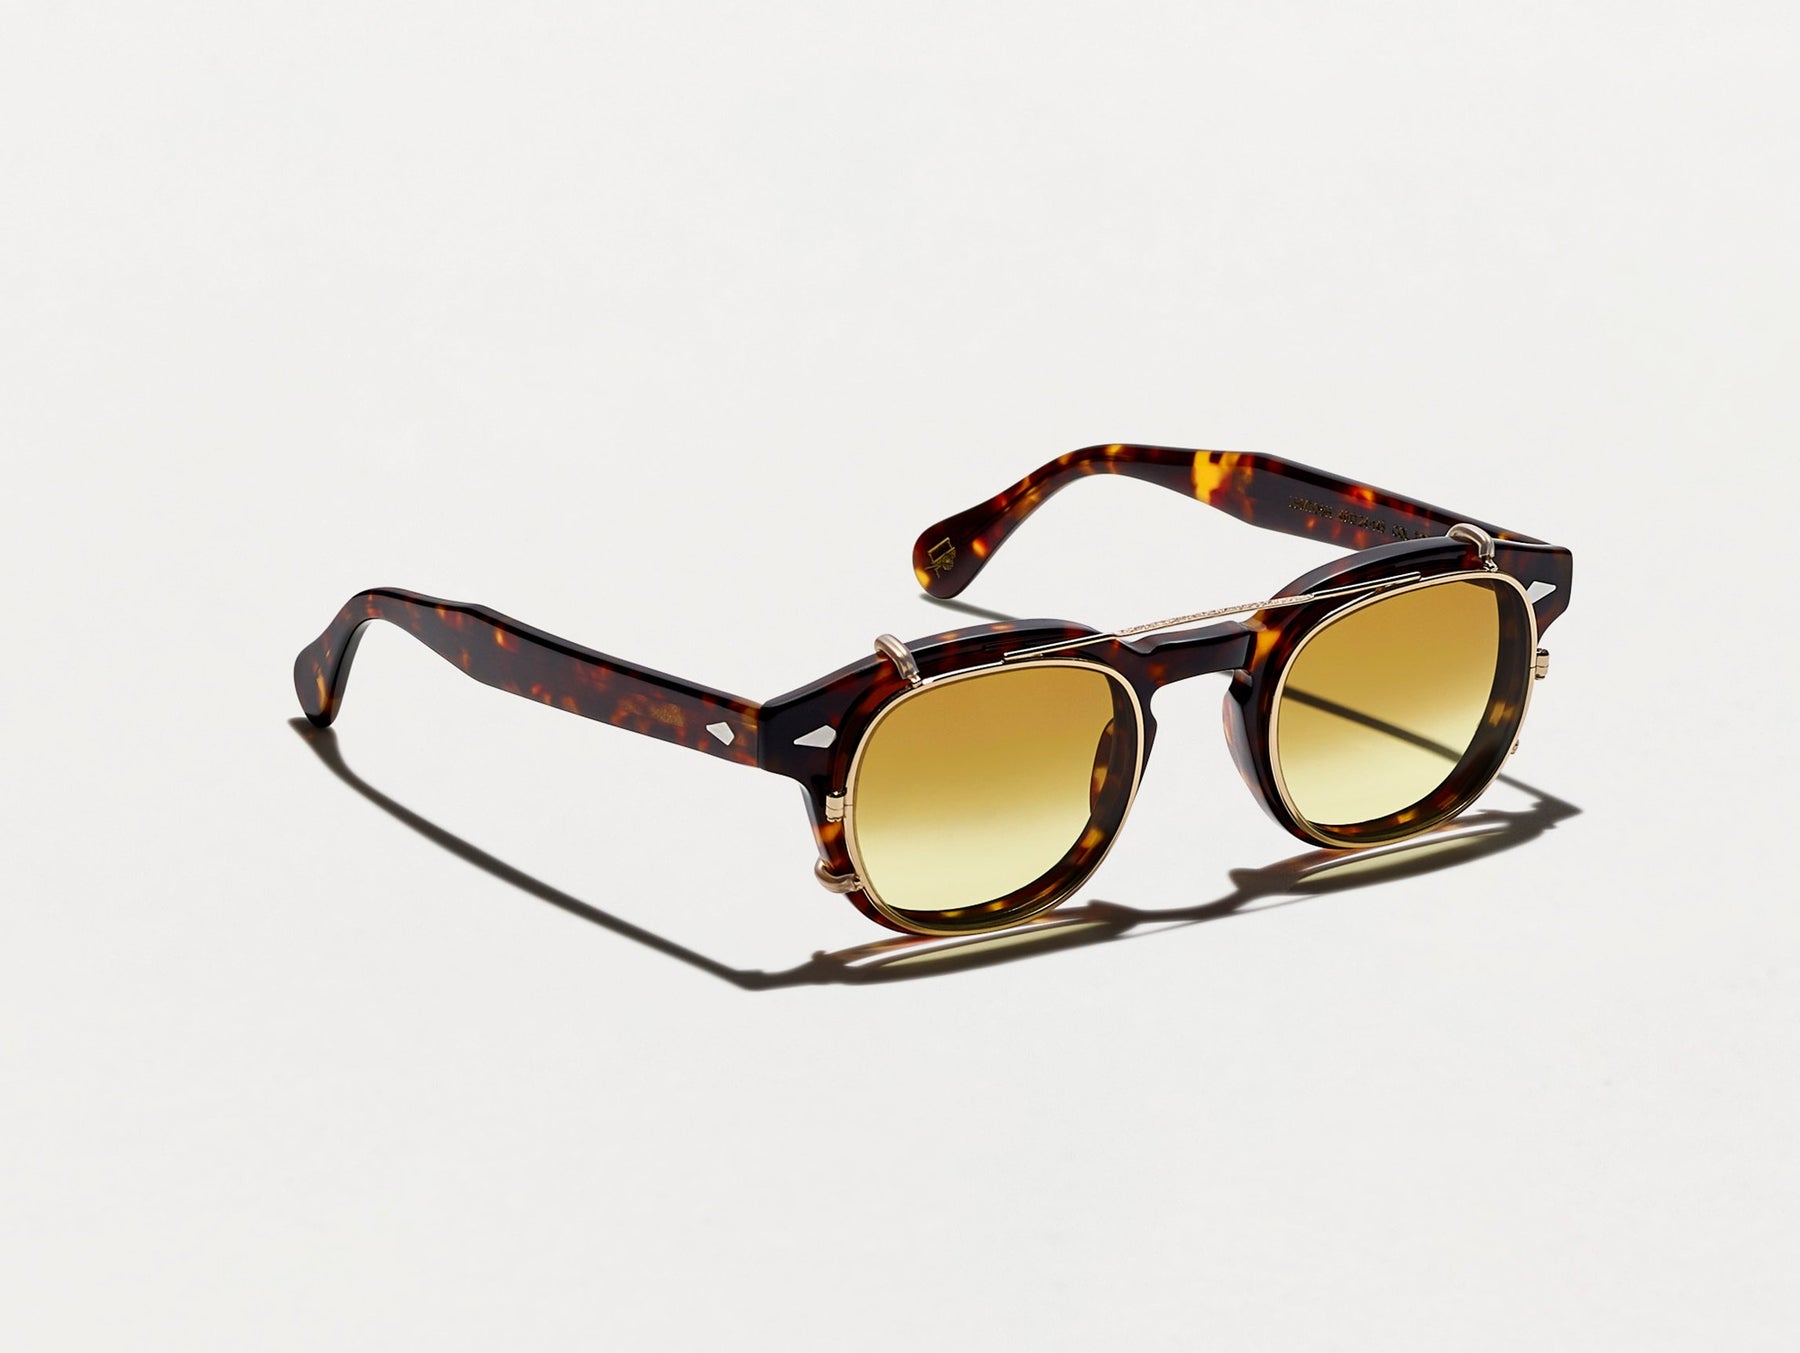 The CLIPTOSH in Gold with Chestnut Fade Tinted Lenses